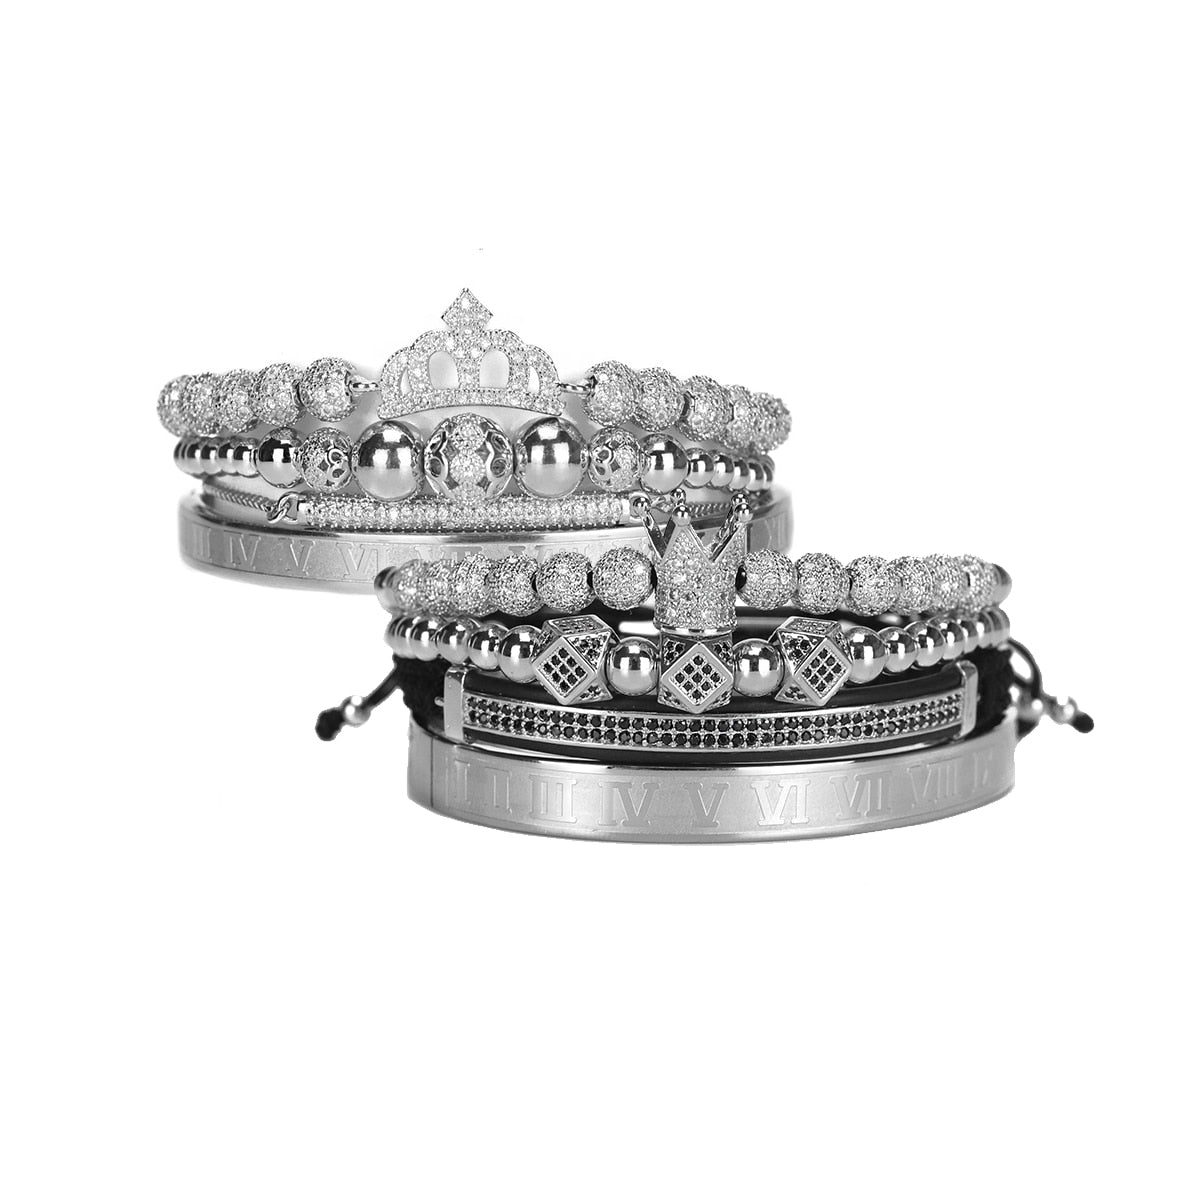 Luxury Royal King Queen Crown charms colorfast Bracelet Stainless steel CZ beads